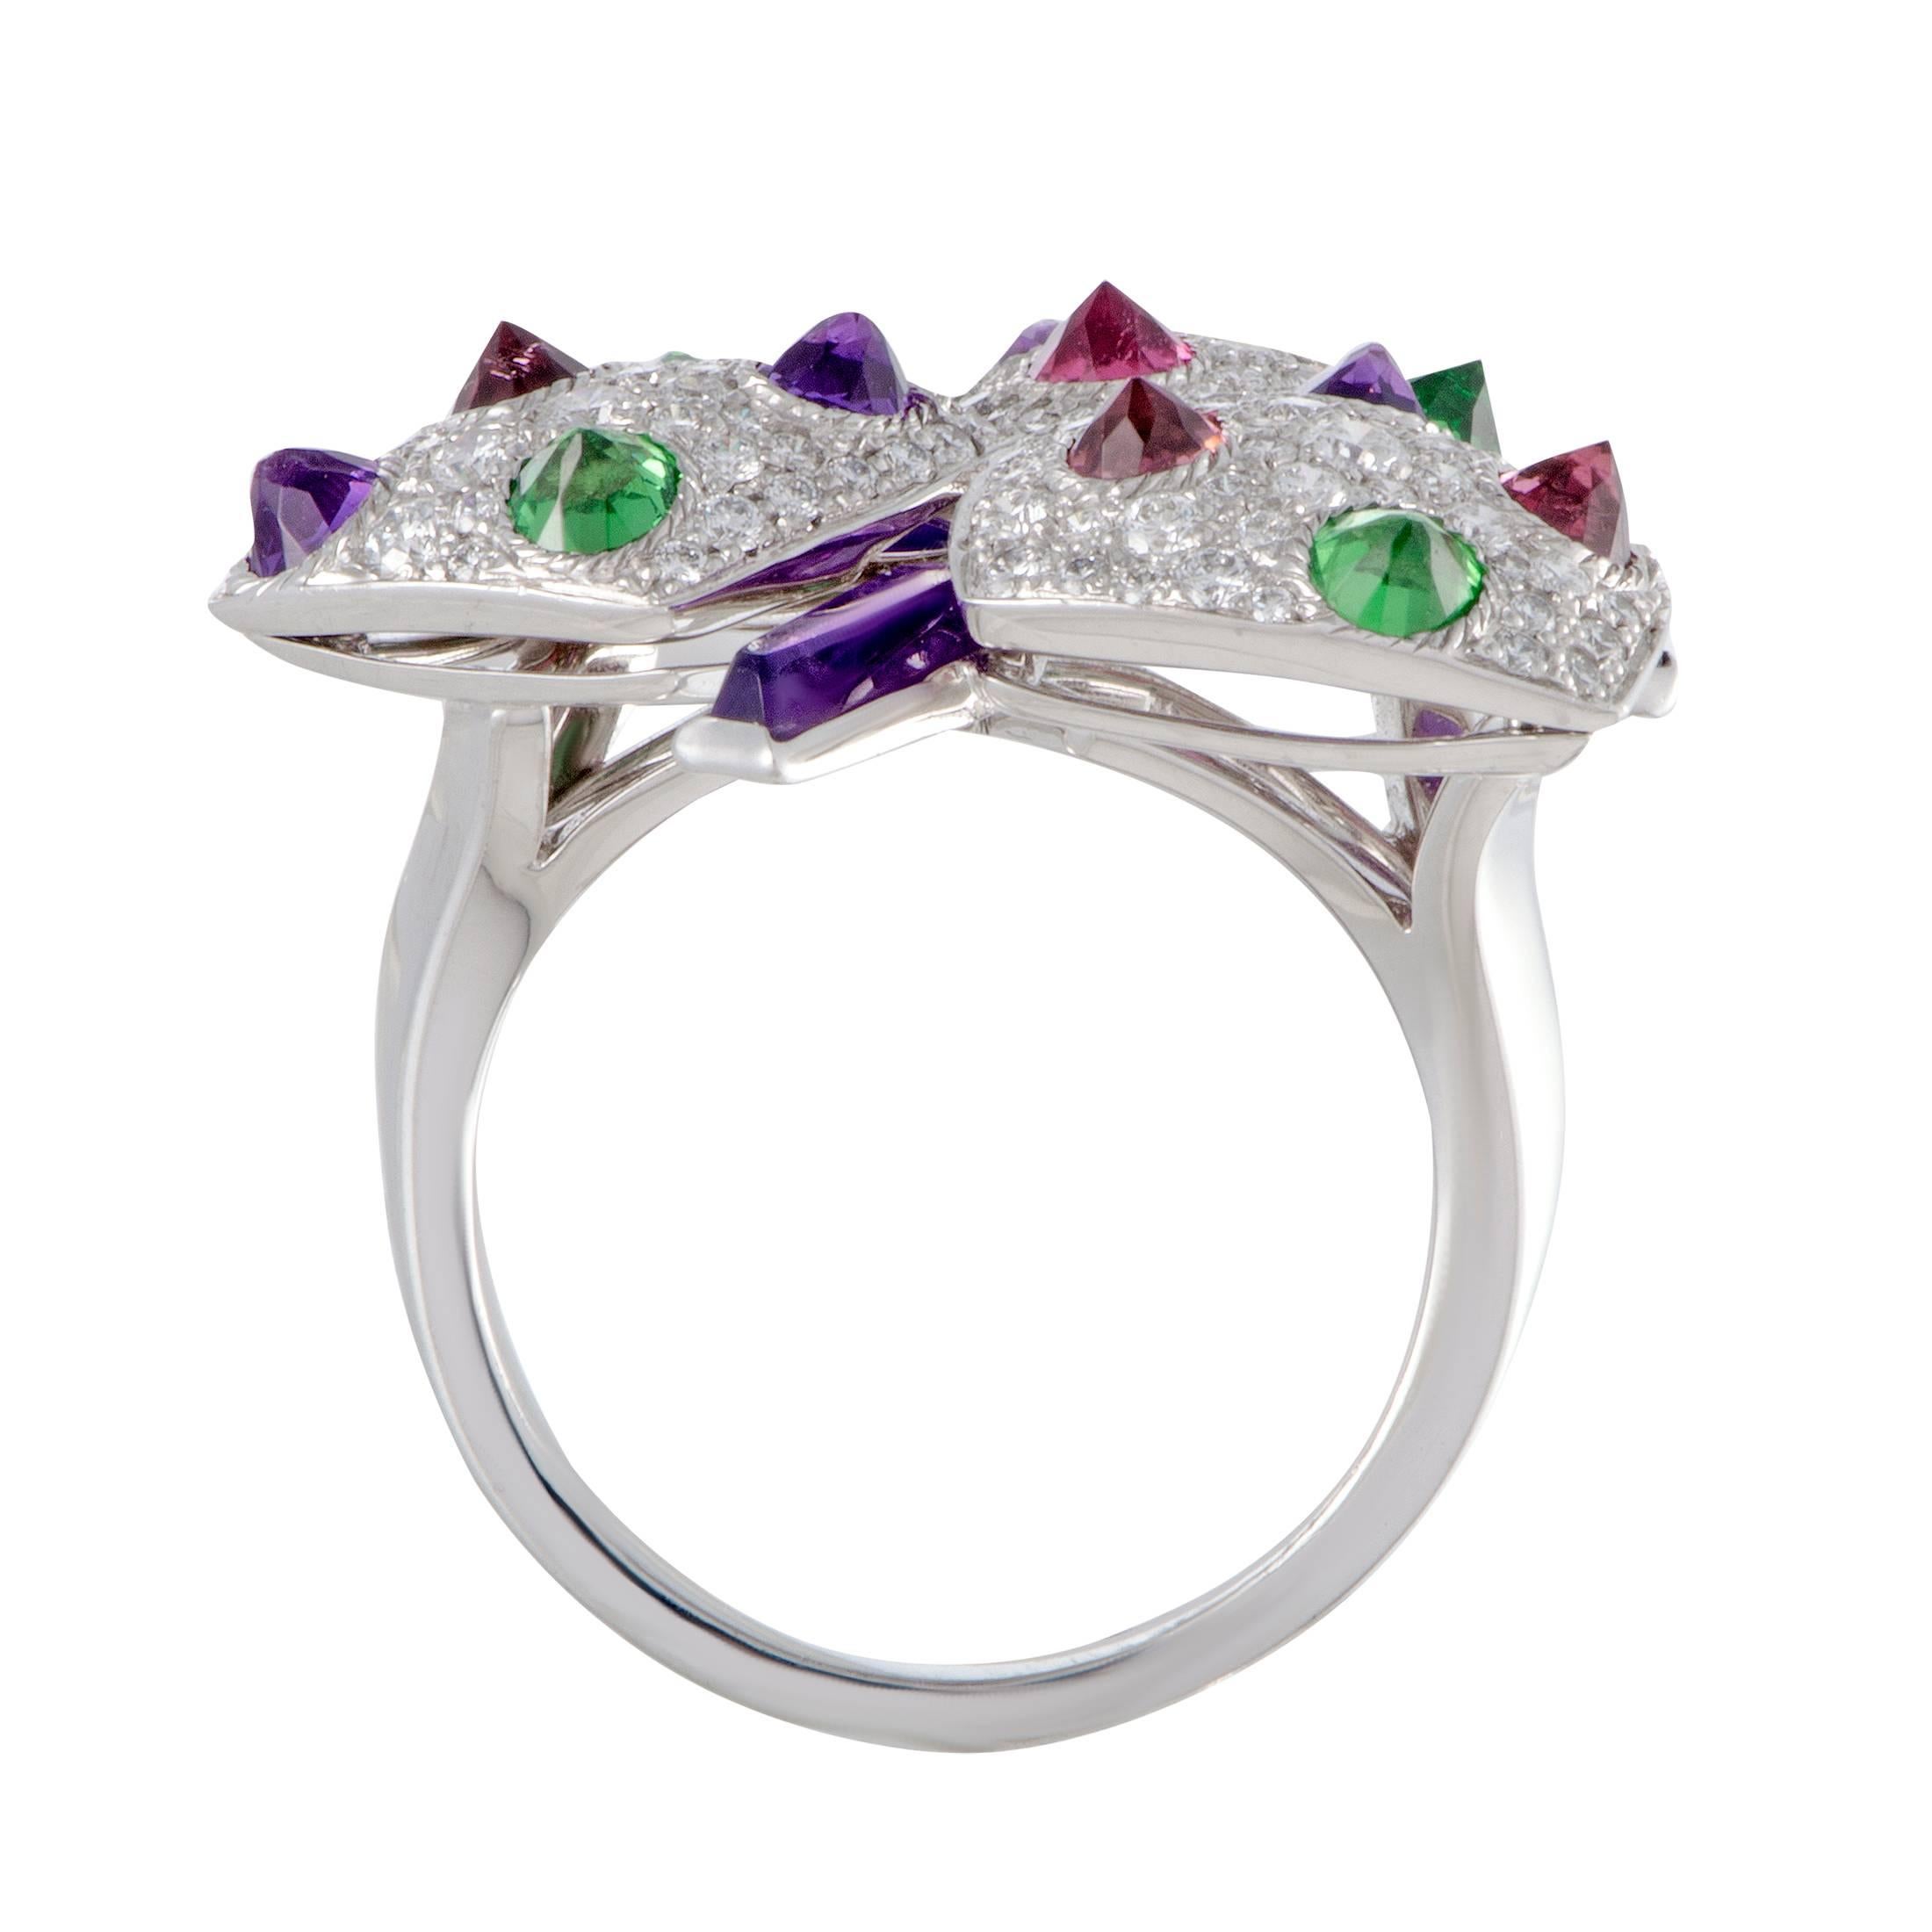 This utterly stunning ring by Cartier is uniquely crafted in the beautiful glisten of 18K white gold. The spectacular design is adorned in gorgeous amethysts, sensational tsavorites, dazzling pink tourmalines and 2.50ct of sparkling diamonds that